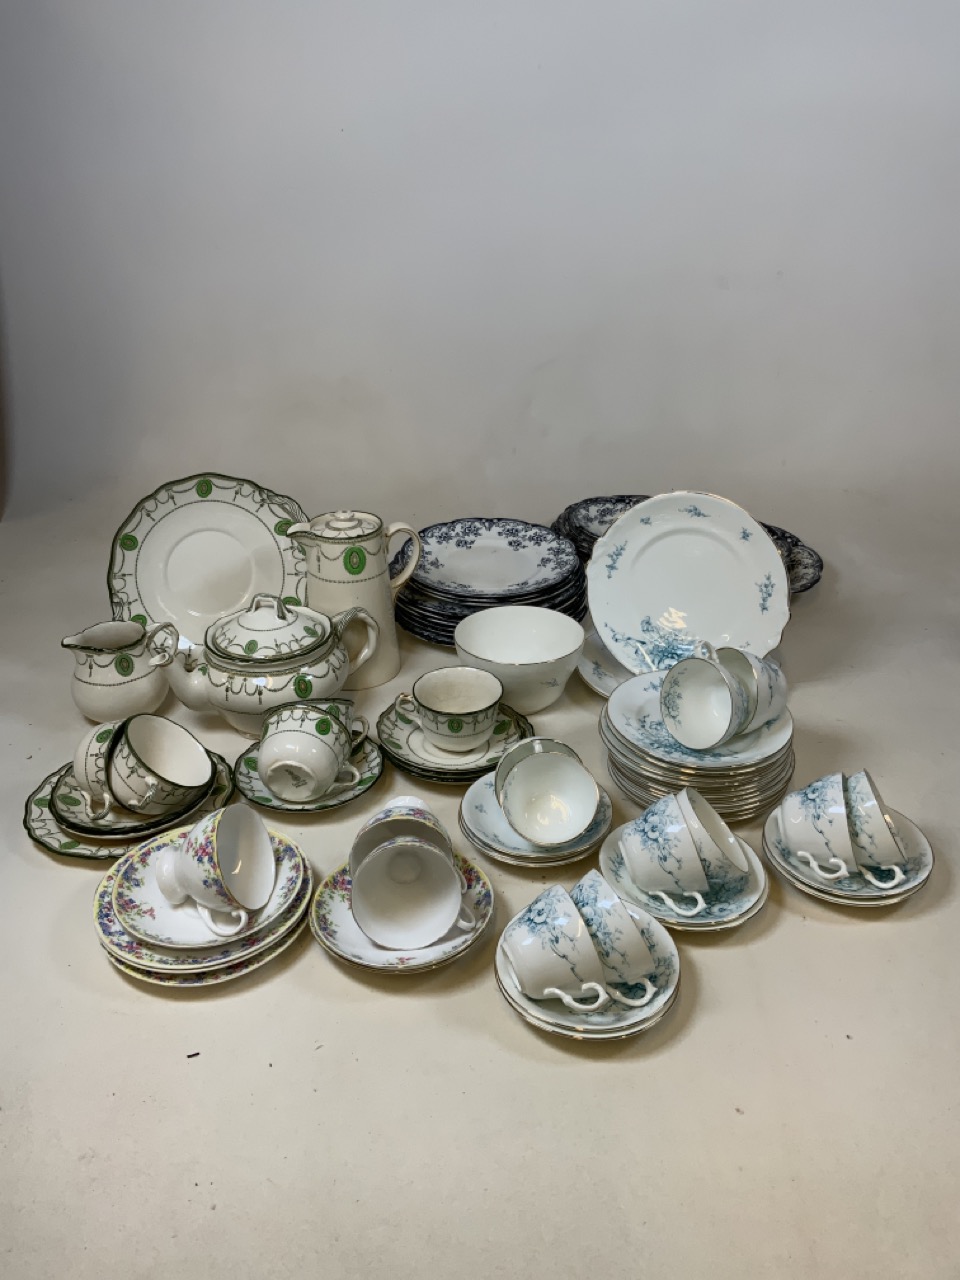 Royal Doulton Countess part tea set, an early 20th century pale blue and white part floral tea